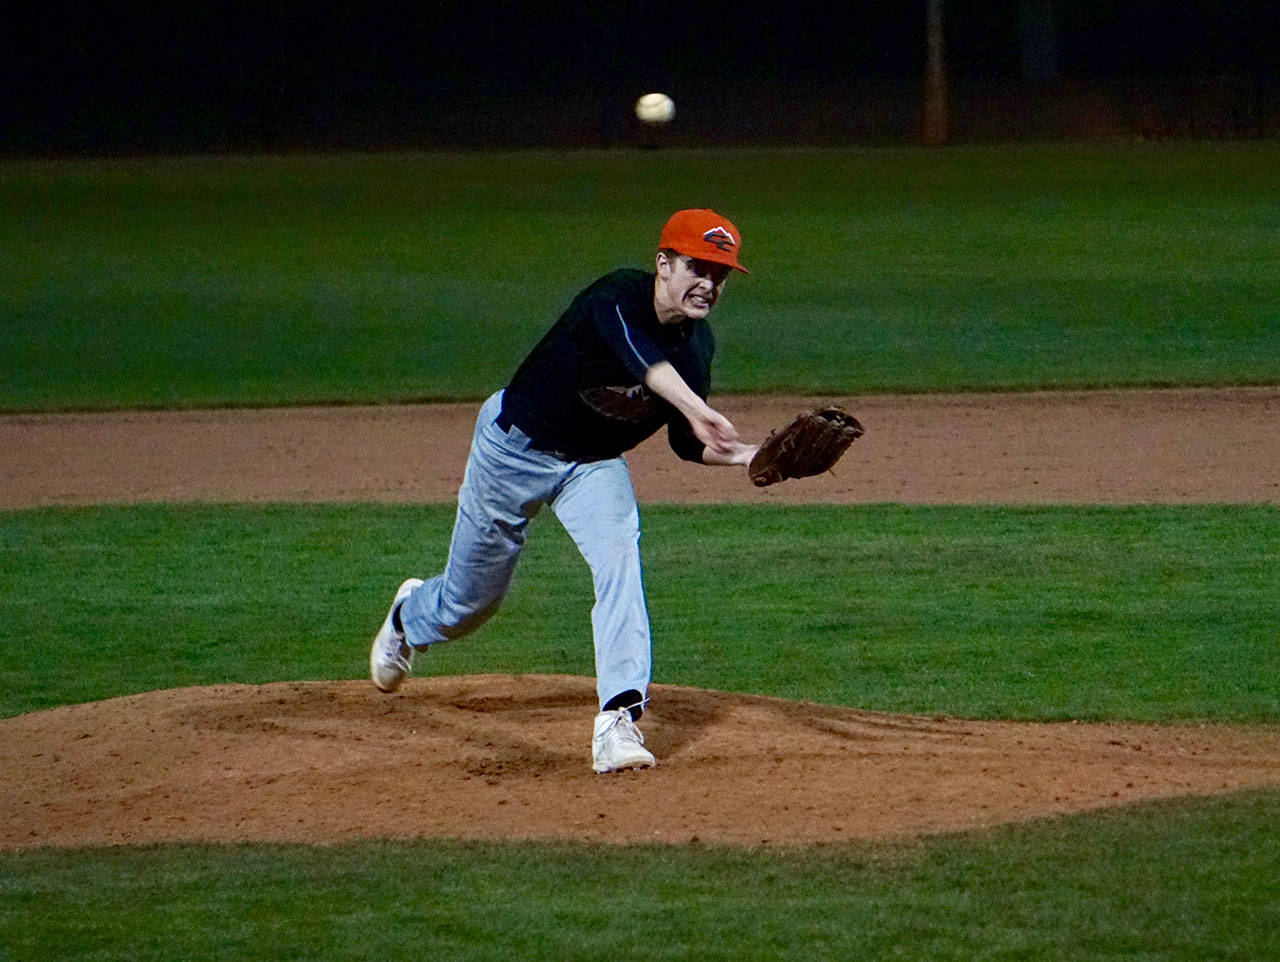 Oak Harbor’s Austin Boesch pitches in a tournament in Phoeniz last month. The Oak Harbor senior was named to the all-tournament team after allowing no earned runs and only two hits over seven innings. (Submitted photo)